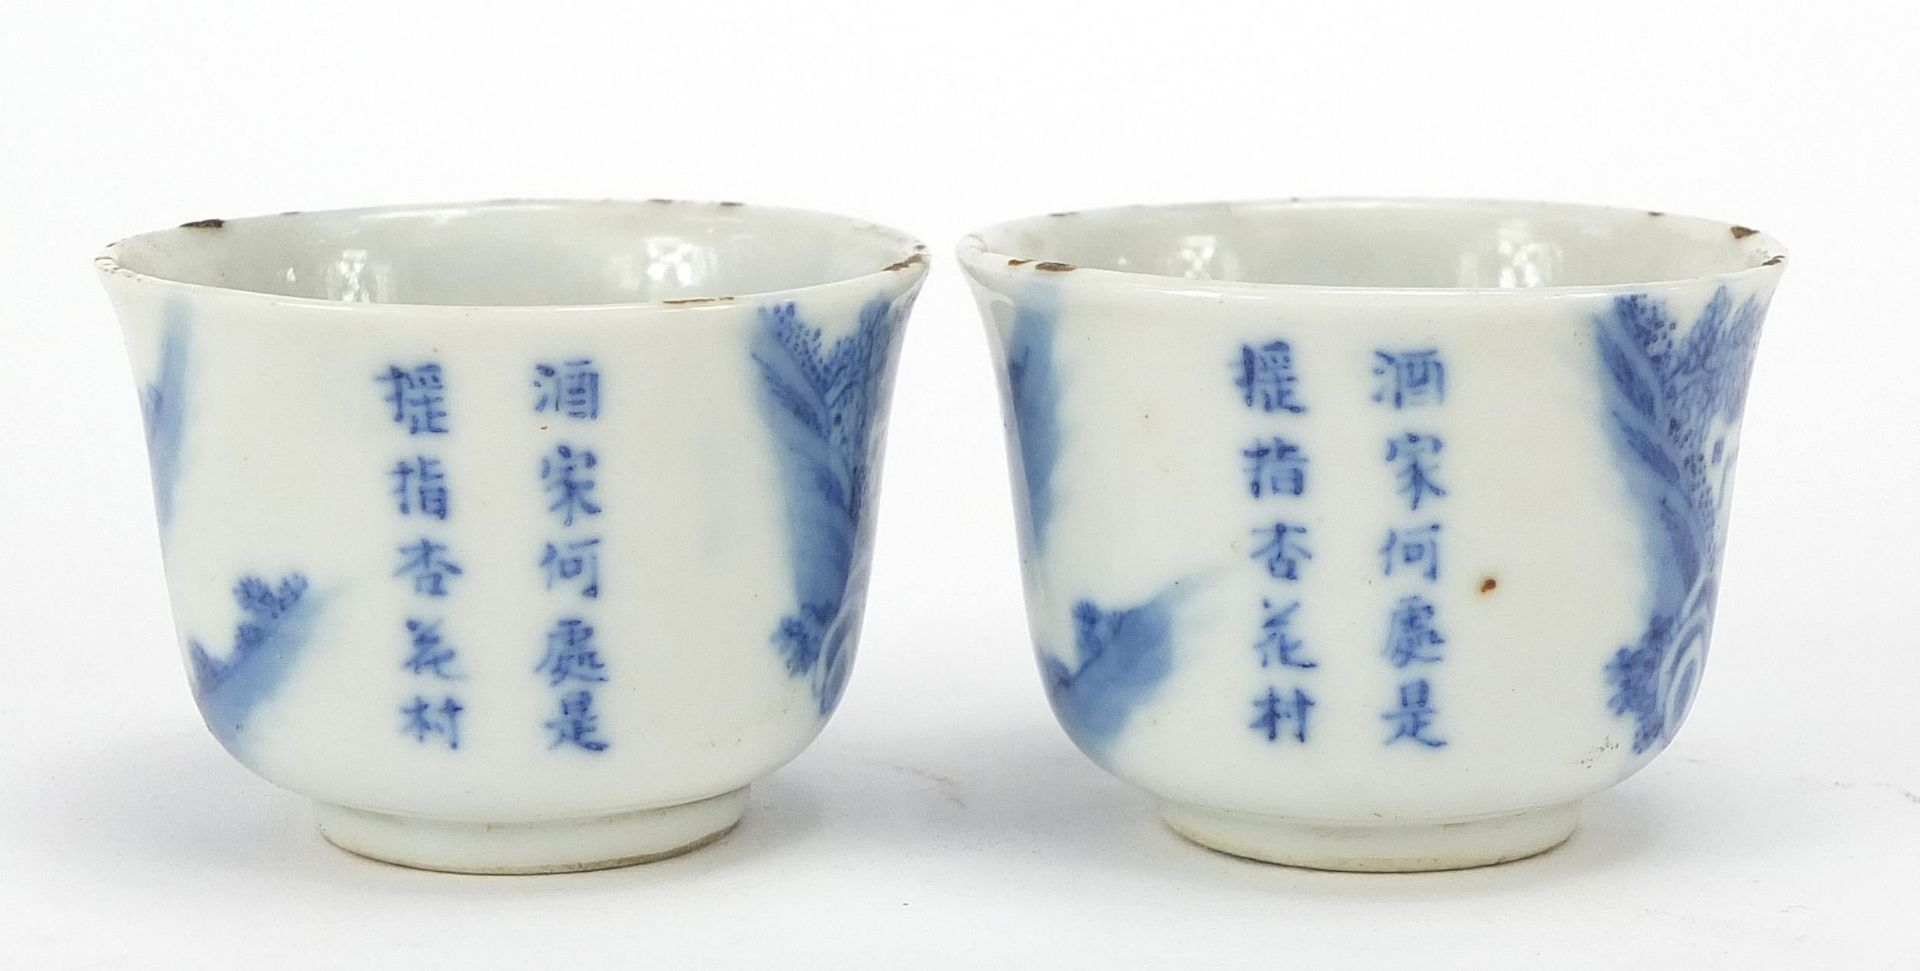 Pair of Chinese blue and white porcelain tea bowls, each hand painted with a figure on buffalo - Image 3 of 9